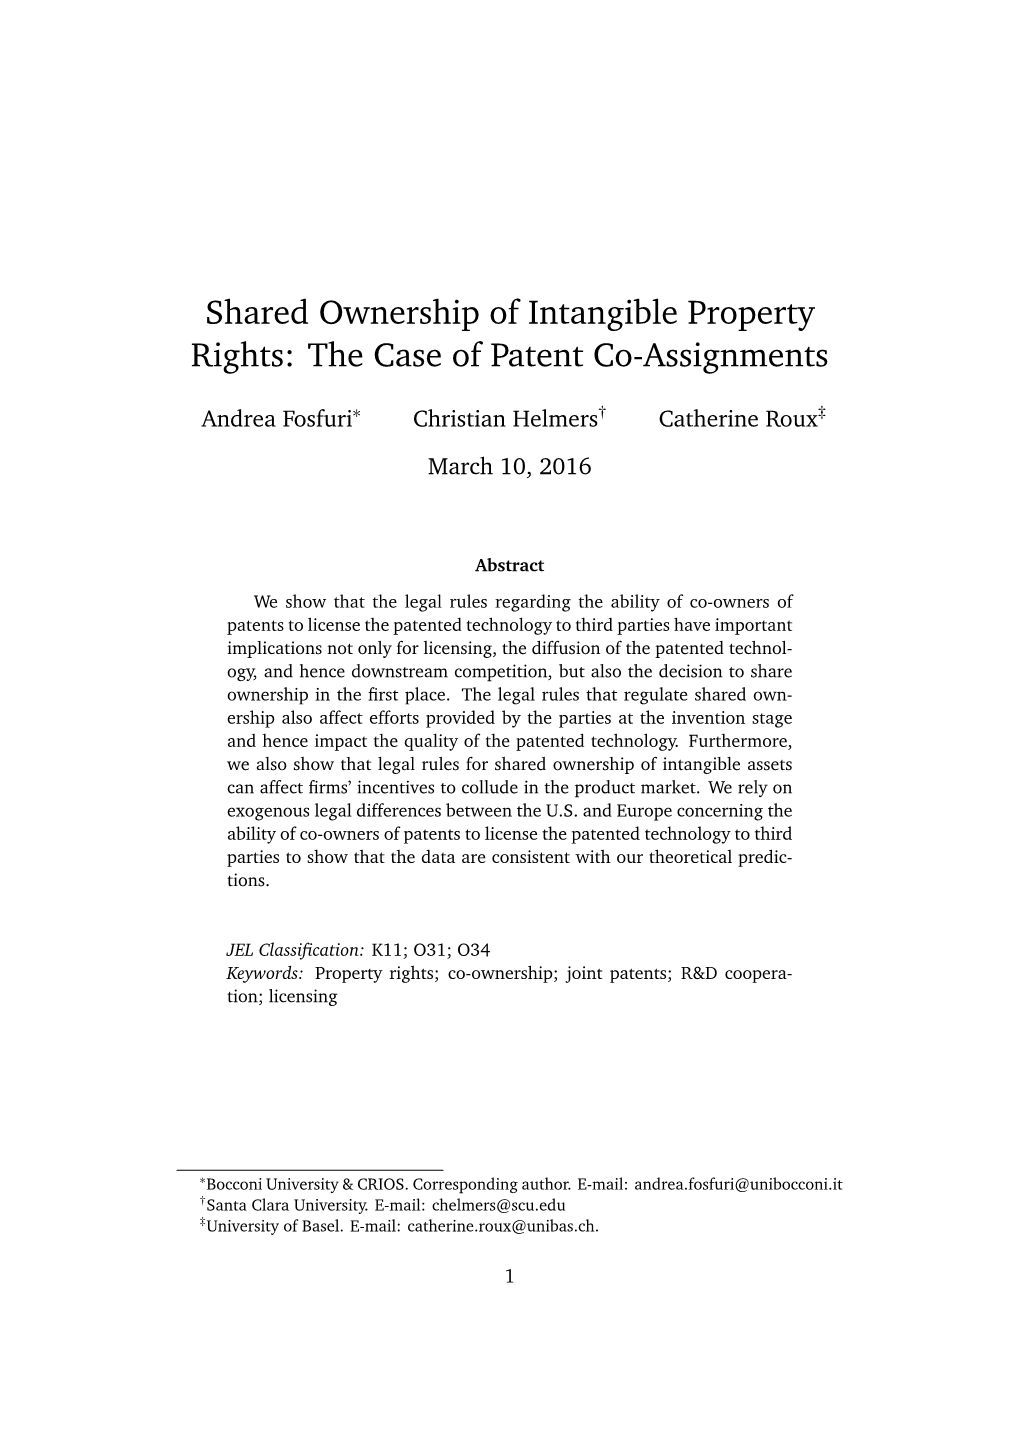 Shared Ownership of Intangible Property Rights: the Case of Patent Co-Assignments